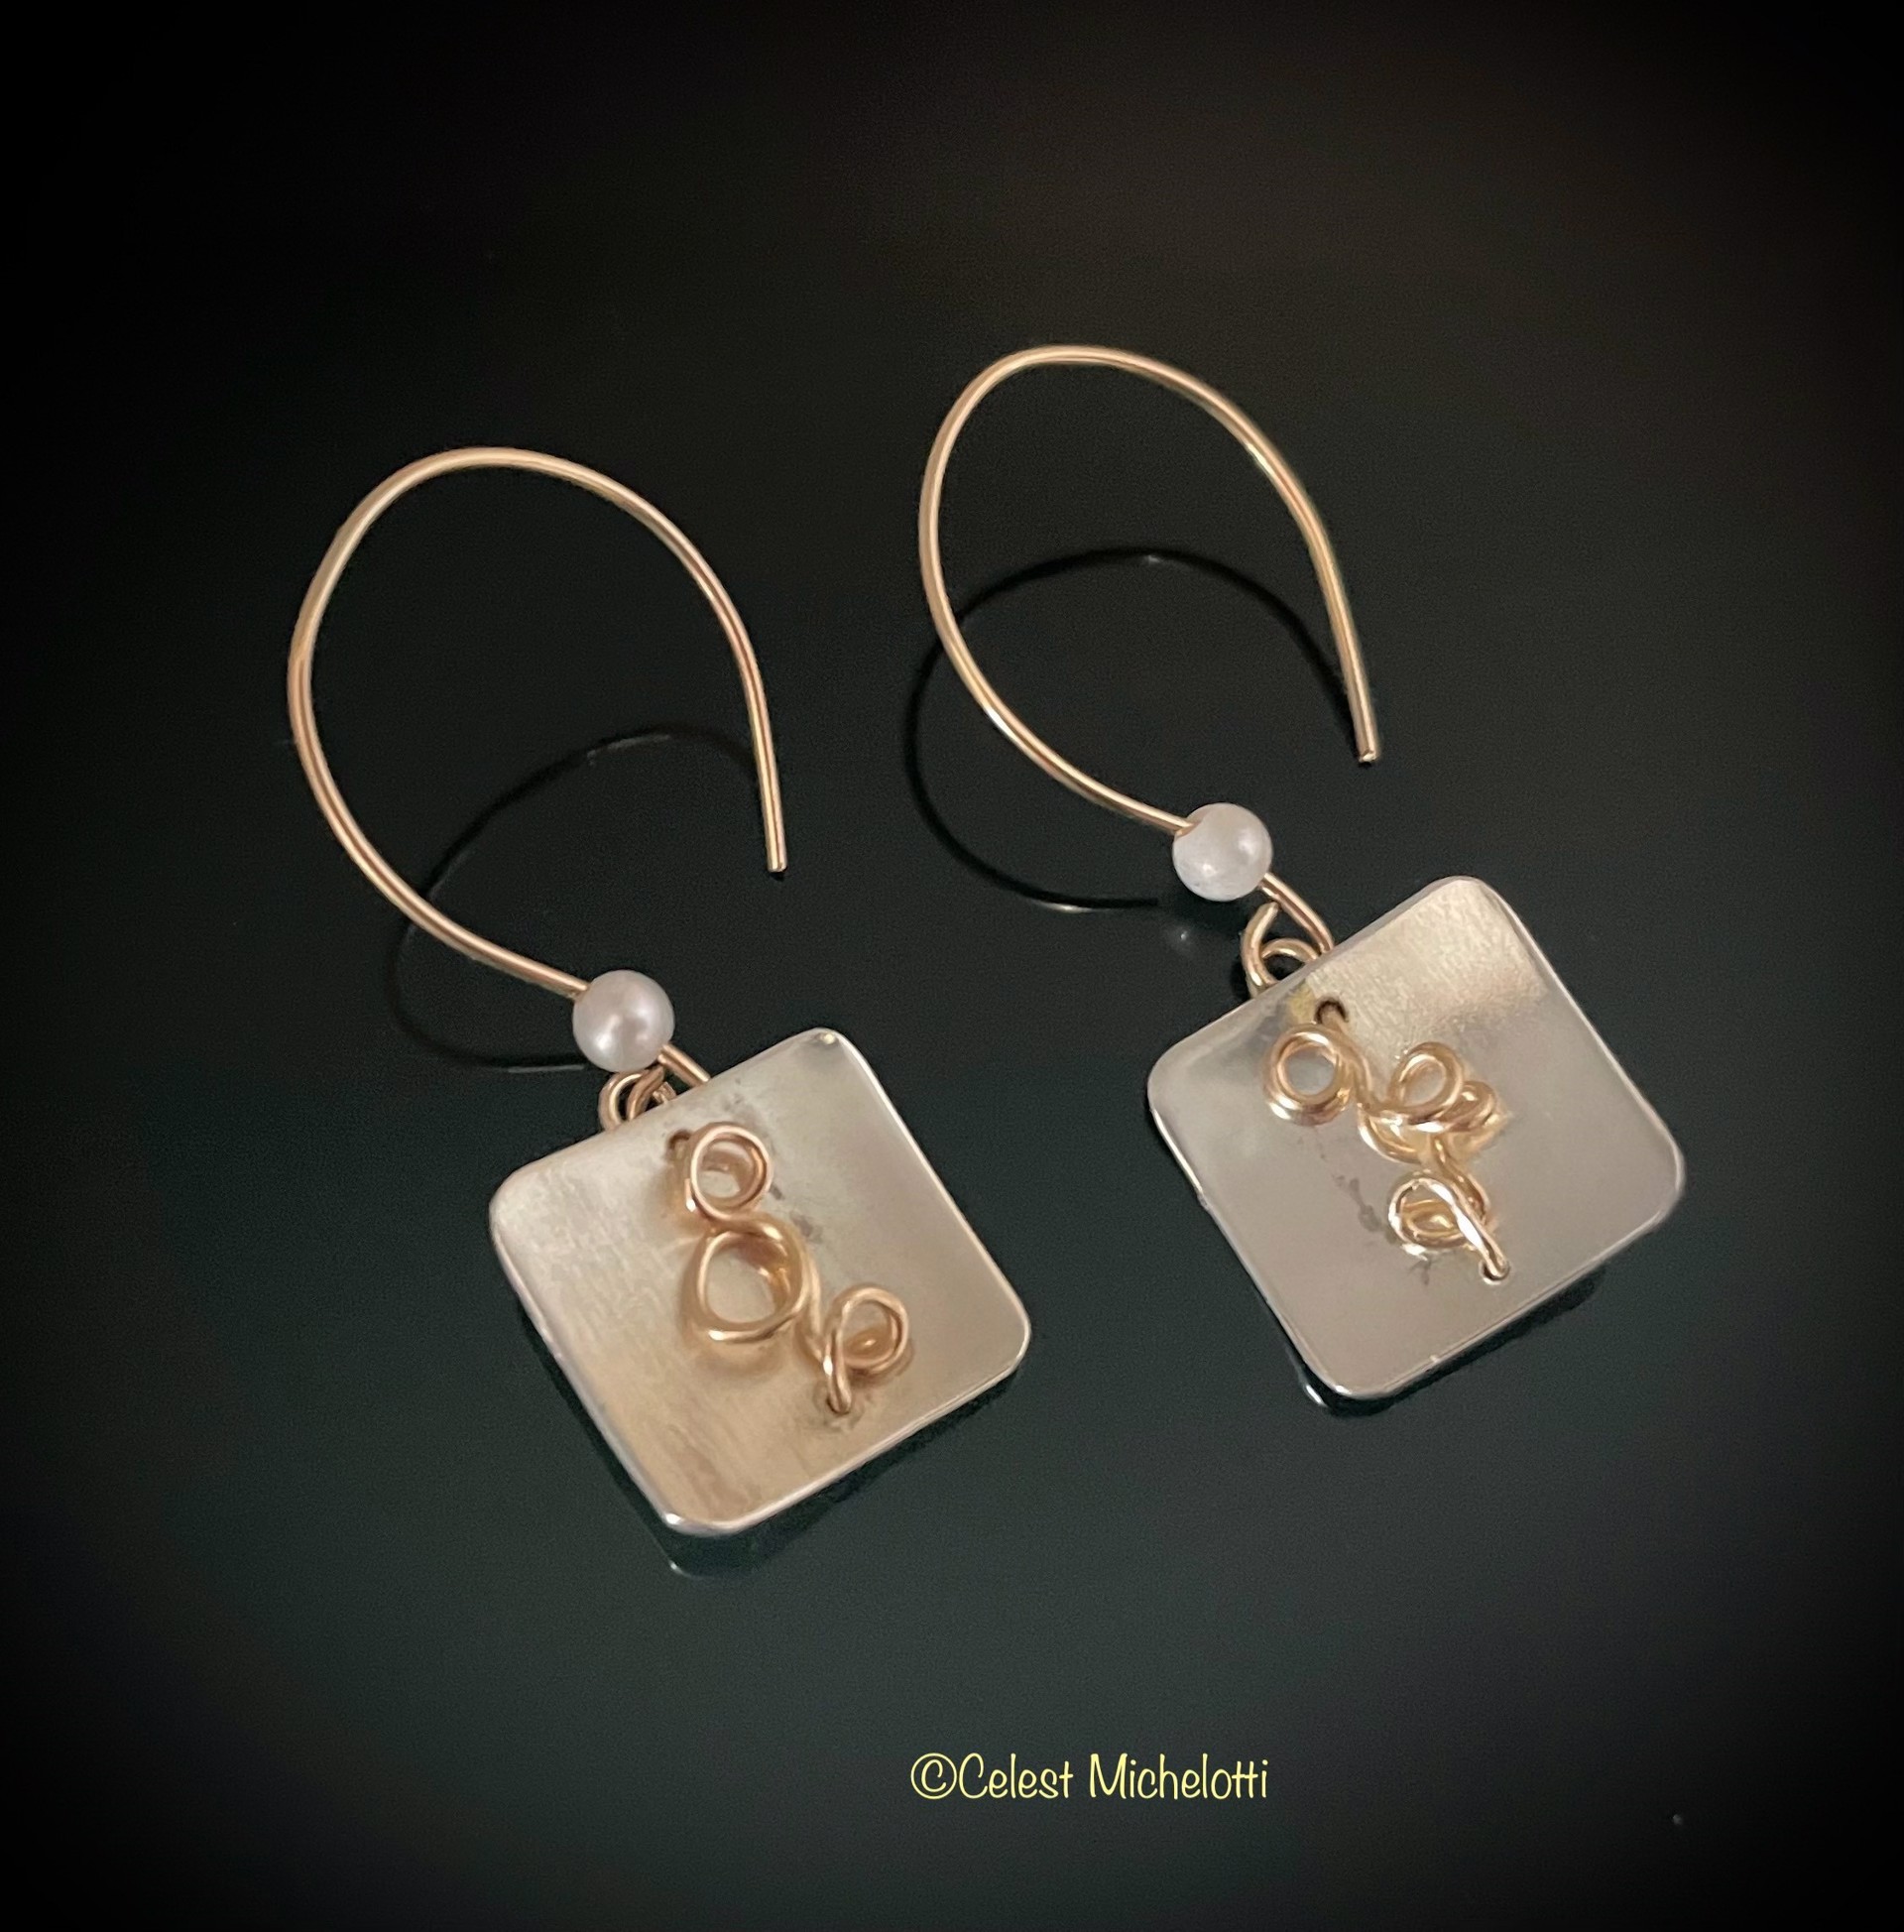 Champagne Earrings, Square .625 in., 14K Gold Filled "Bubbles” with Pearls on Earwires by Celest Michelotti